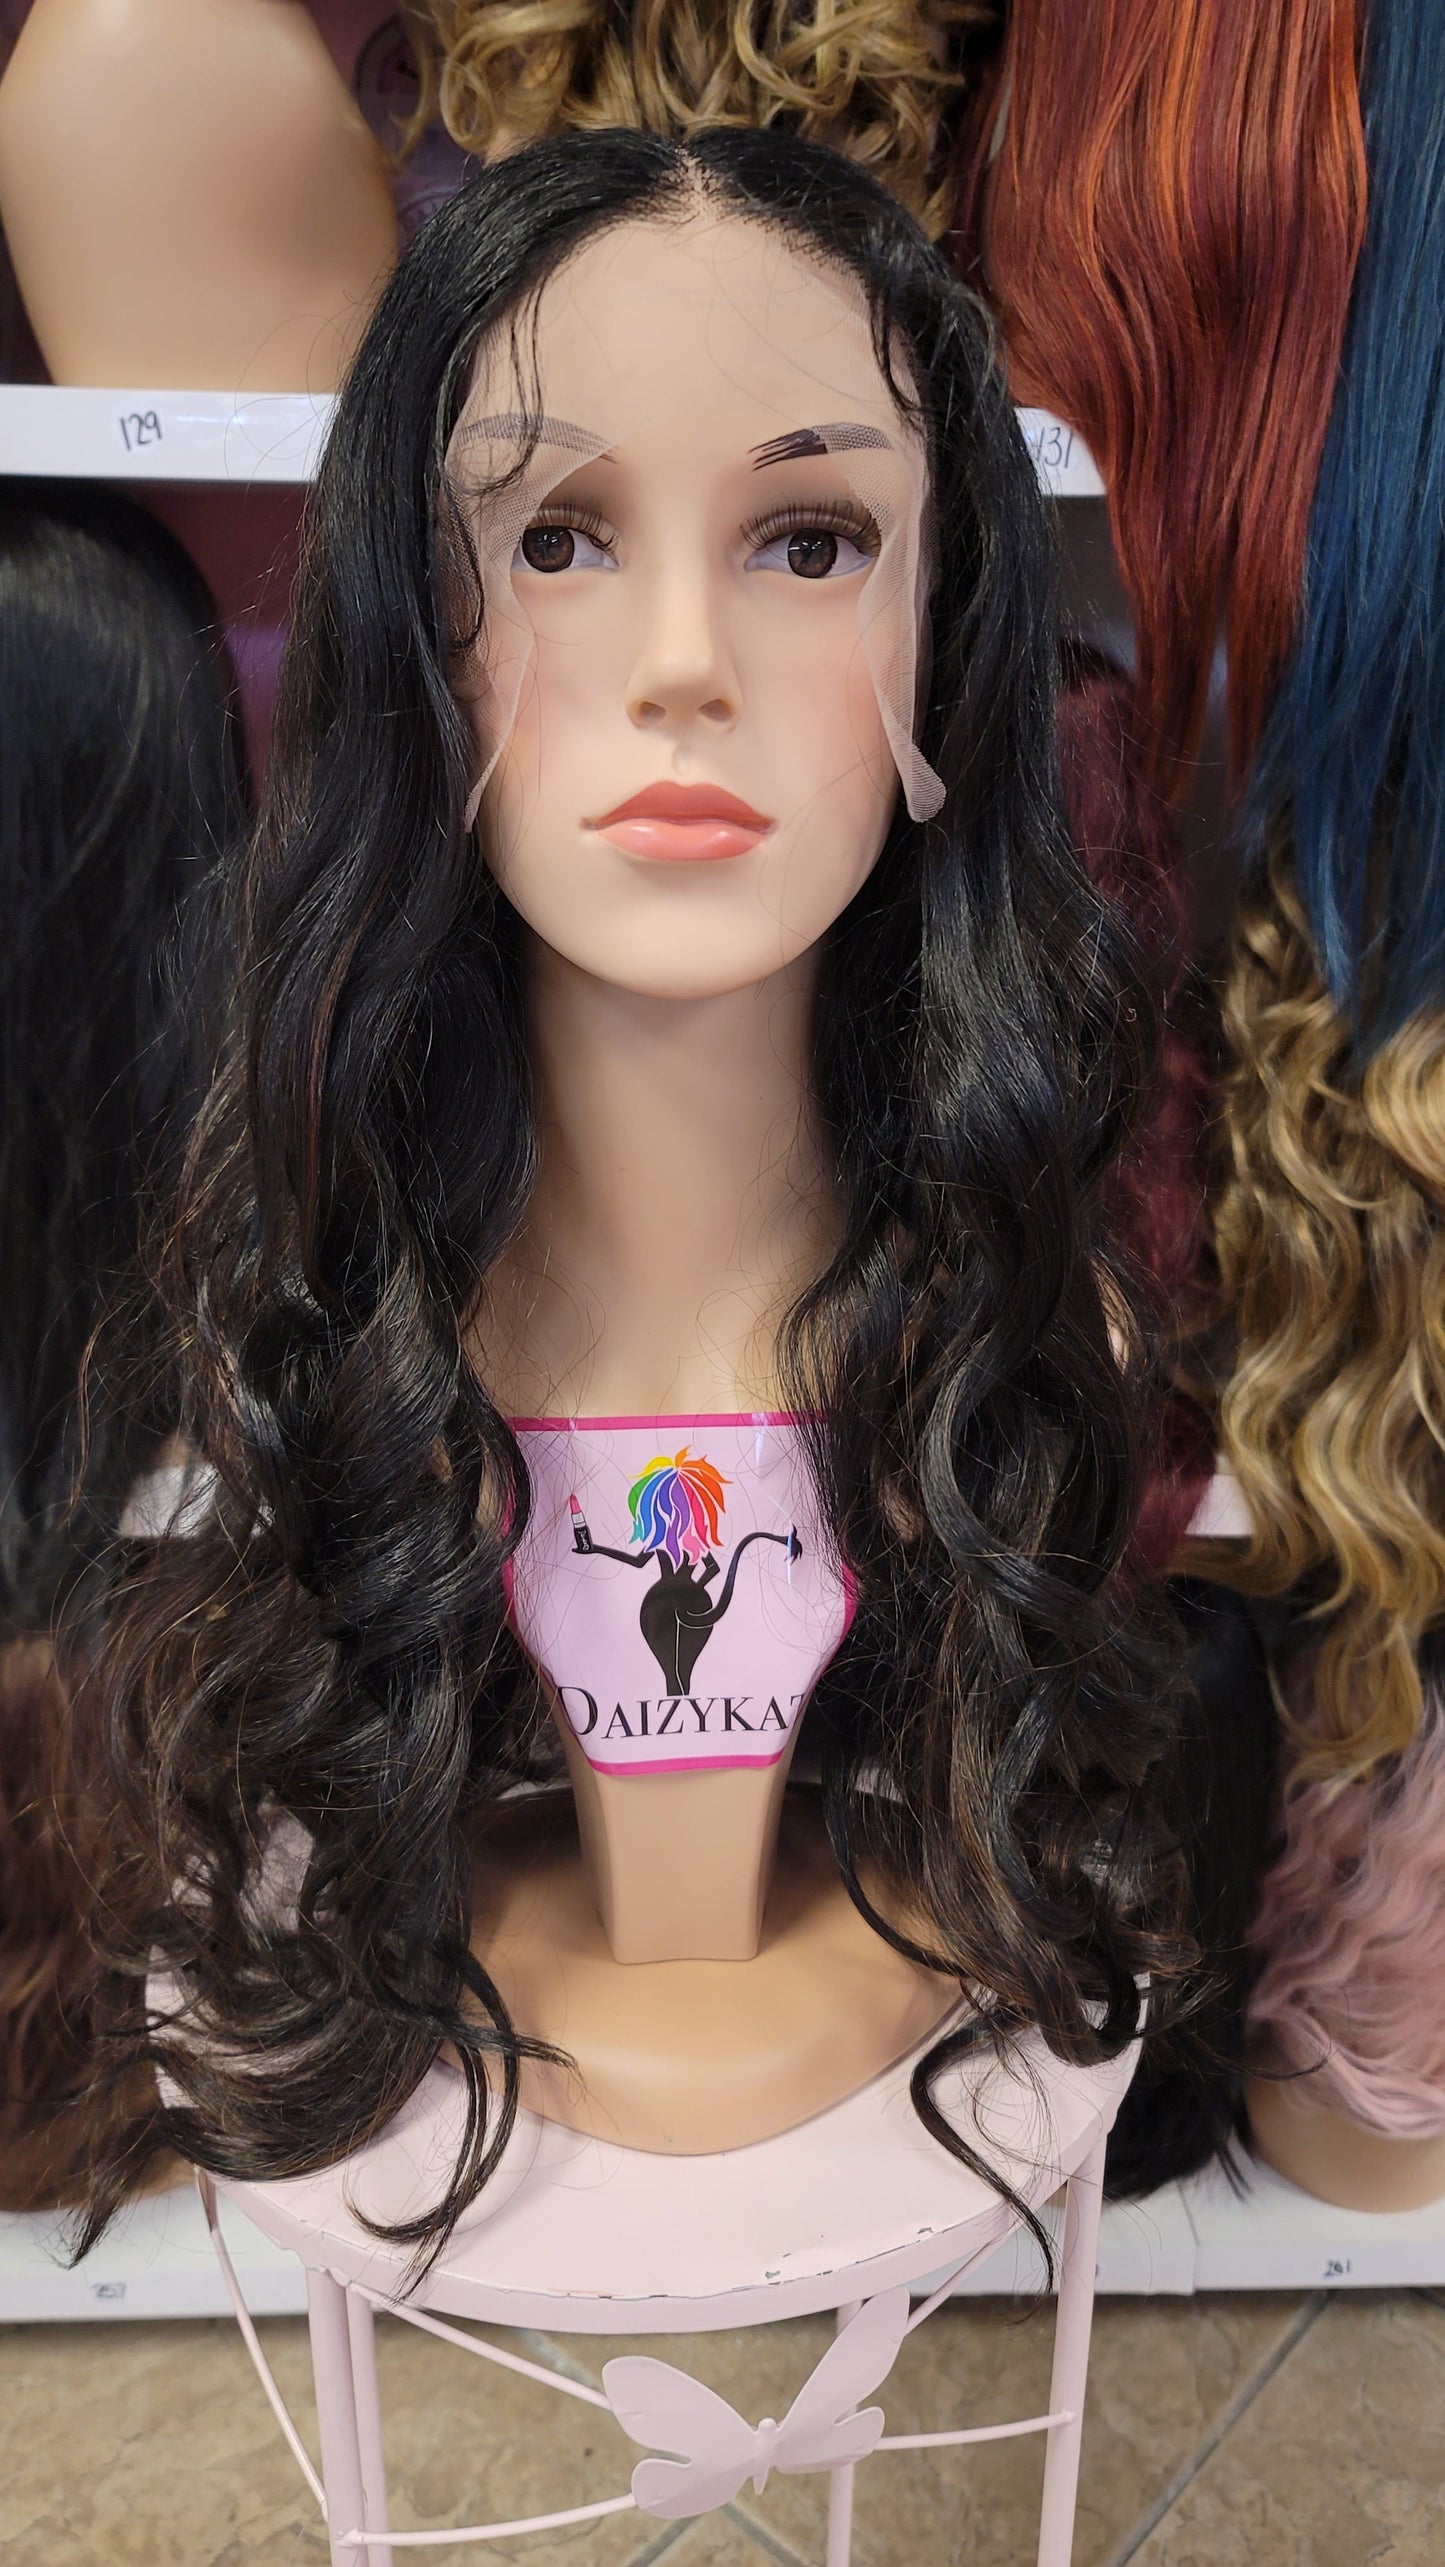 122 Sloan - Middle Part Lace Front Wig - 1B/30 - DaizyKat Cosmetics 122 Sloan - Middle Part Lace Front Wig - 1B/30 DaizyKat Cosmetics Wigs